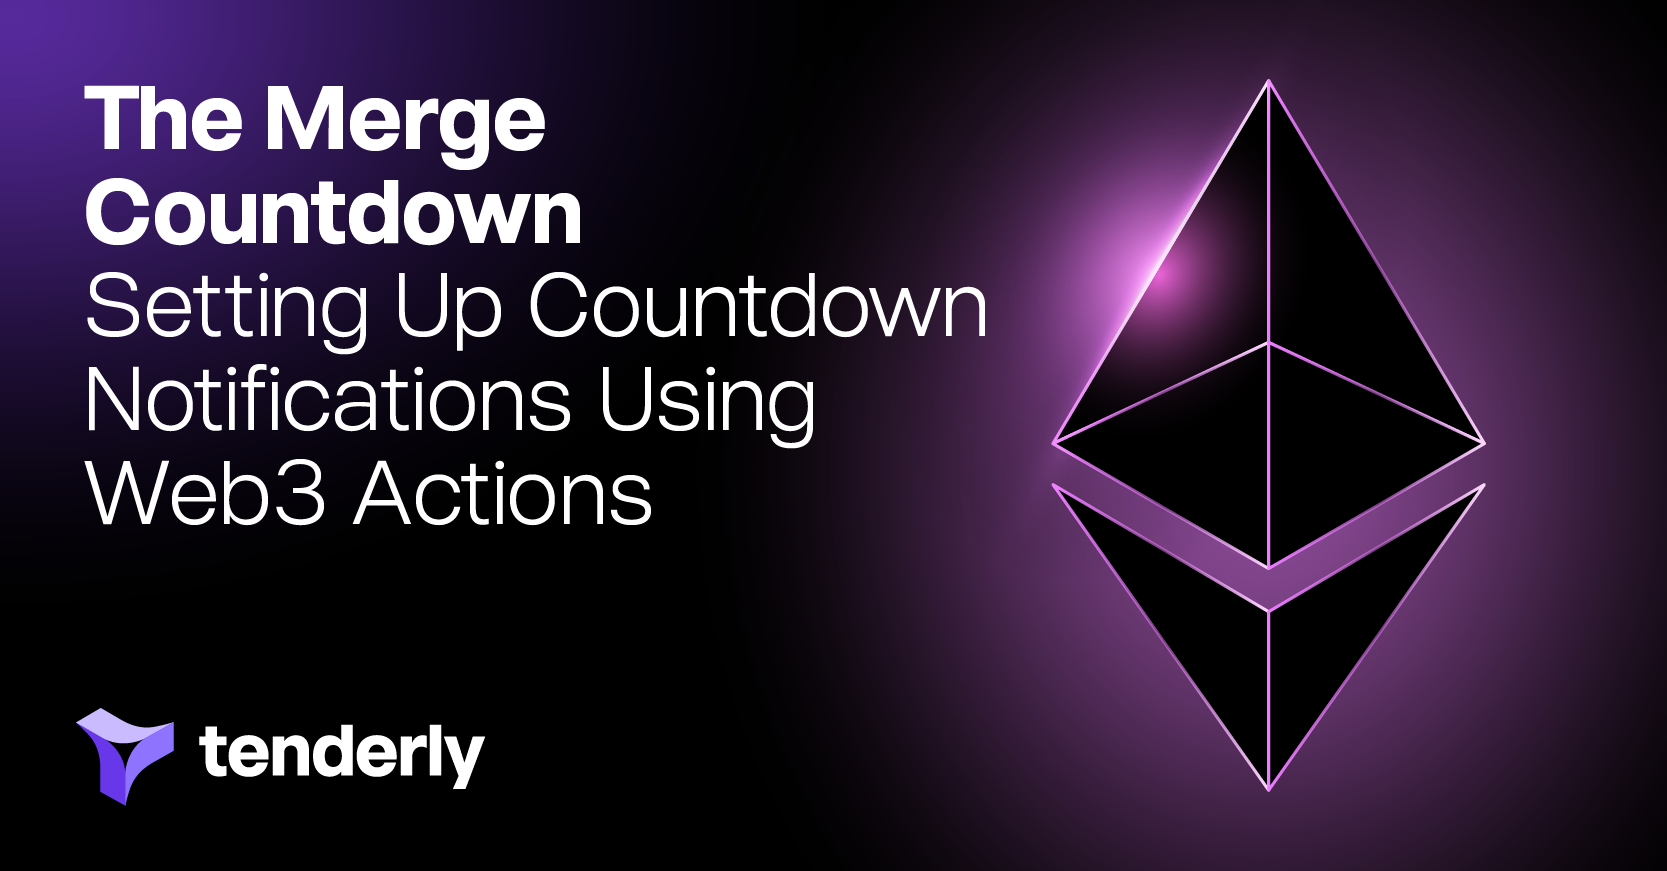 The Merge Countdown: How Not to Miss The Merge With Web3 Actions